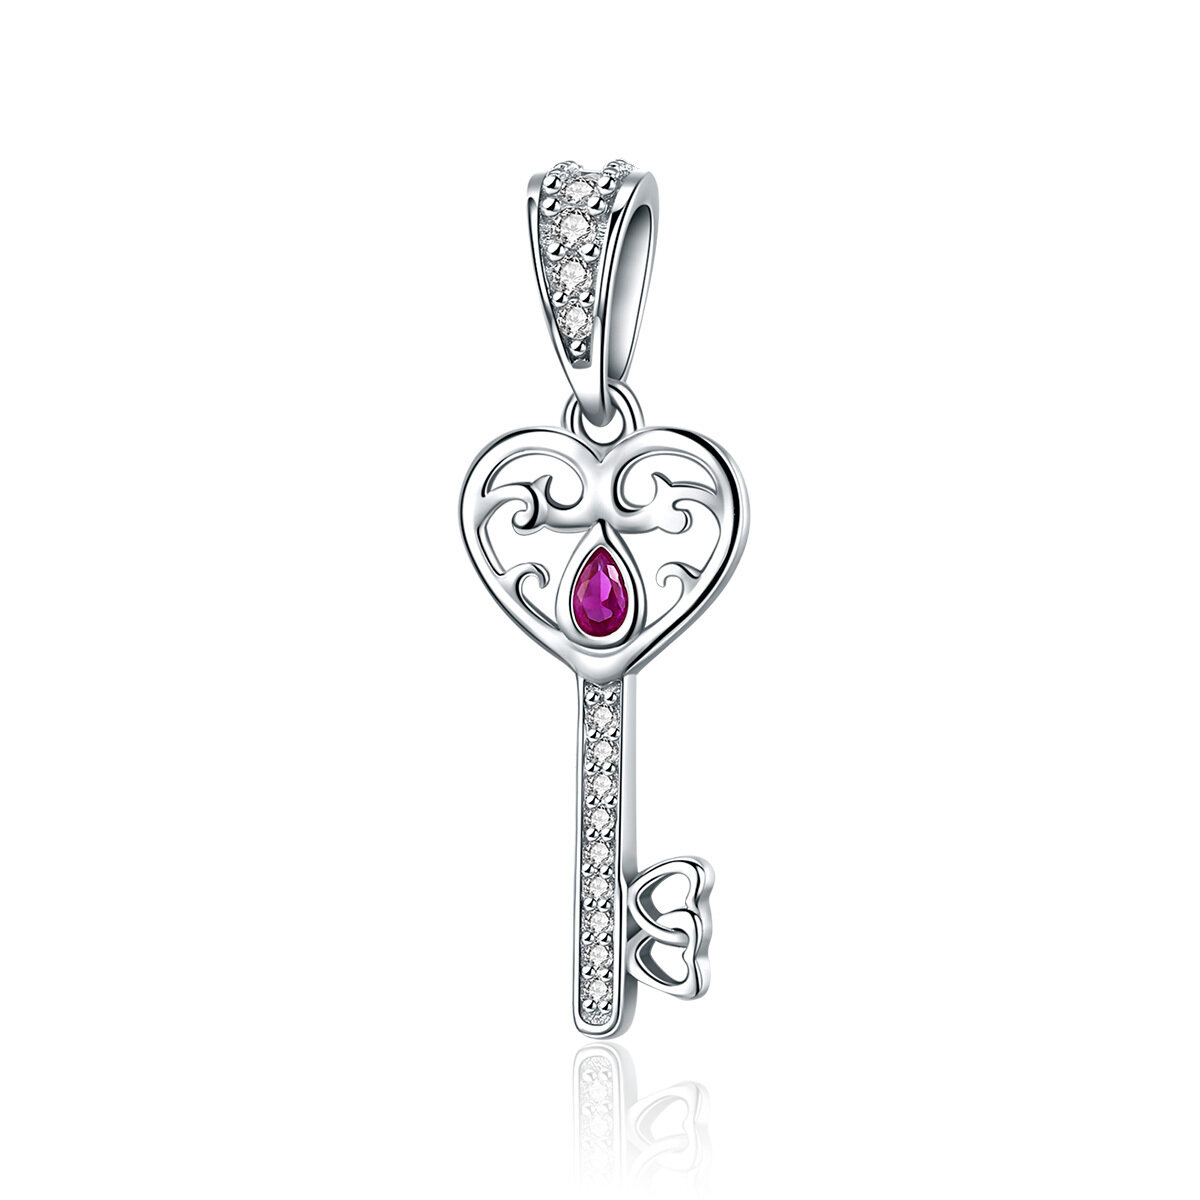 GemKing SCC791 Happiness Key S925 Sterling Silver Charm